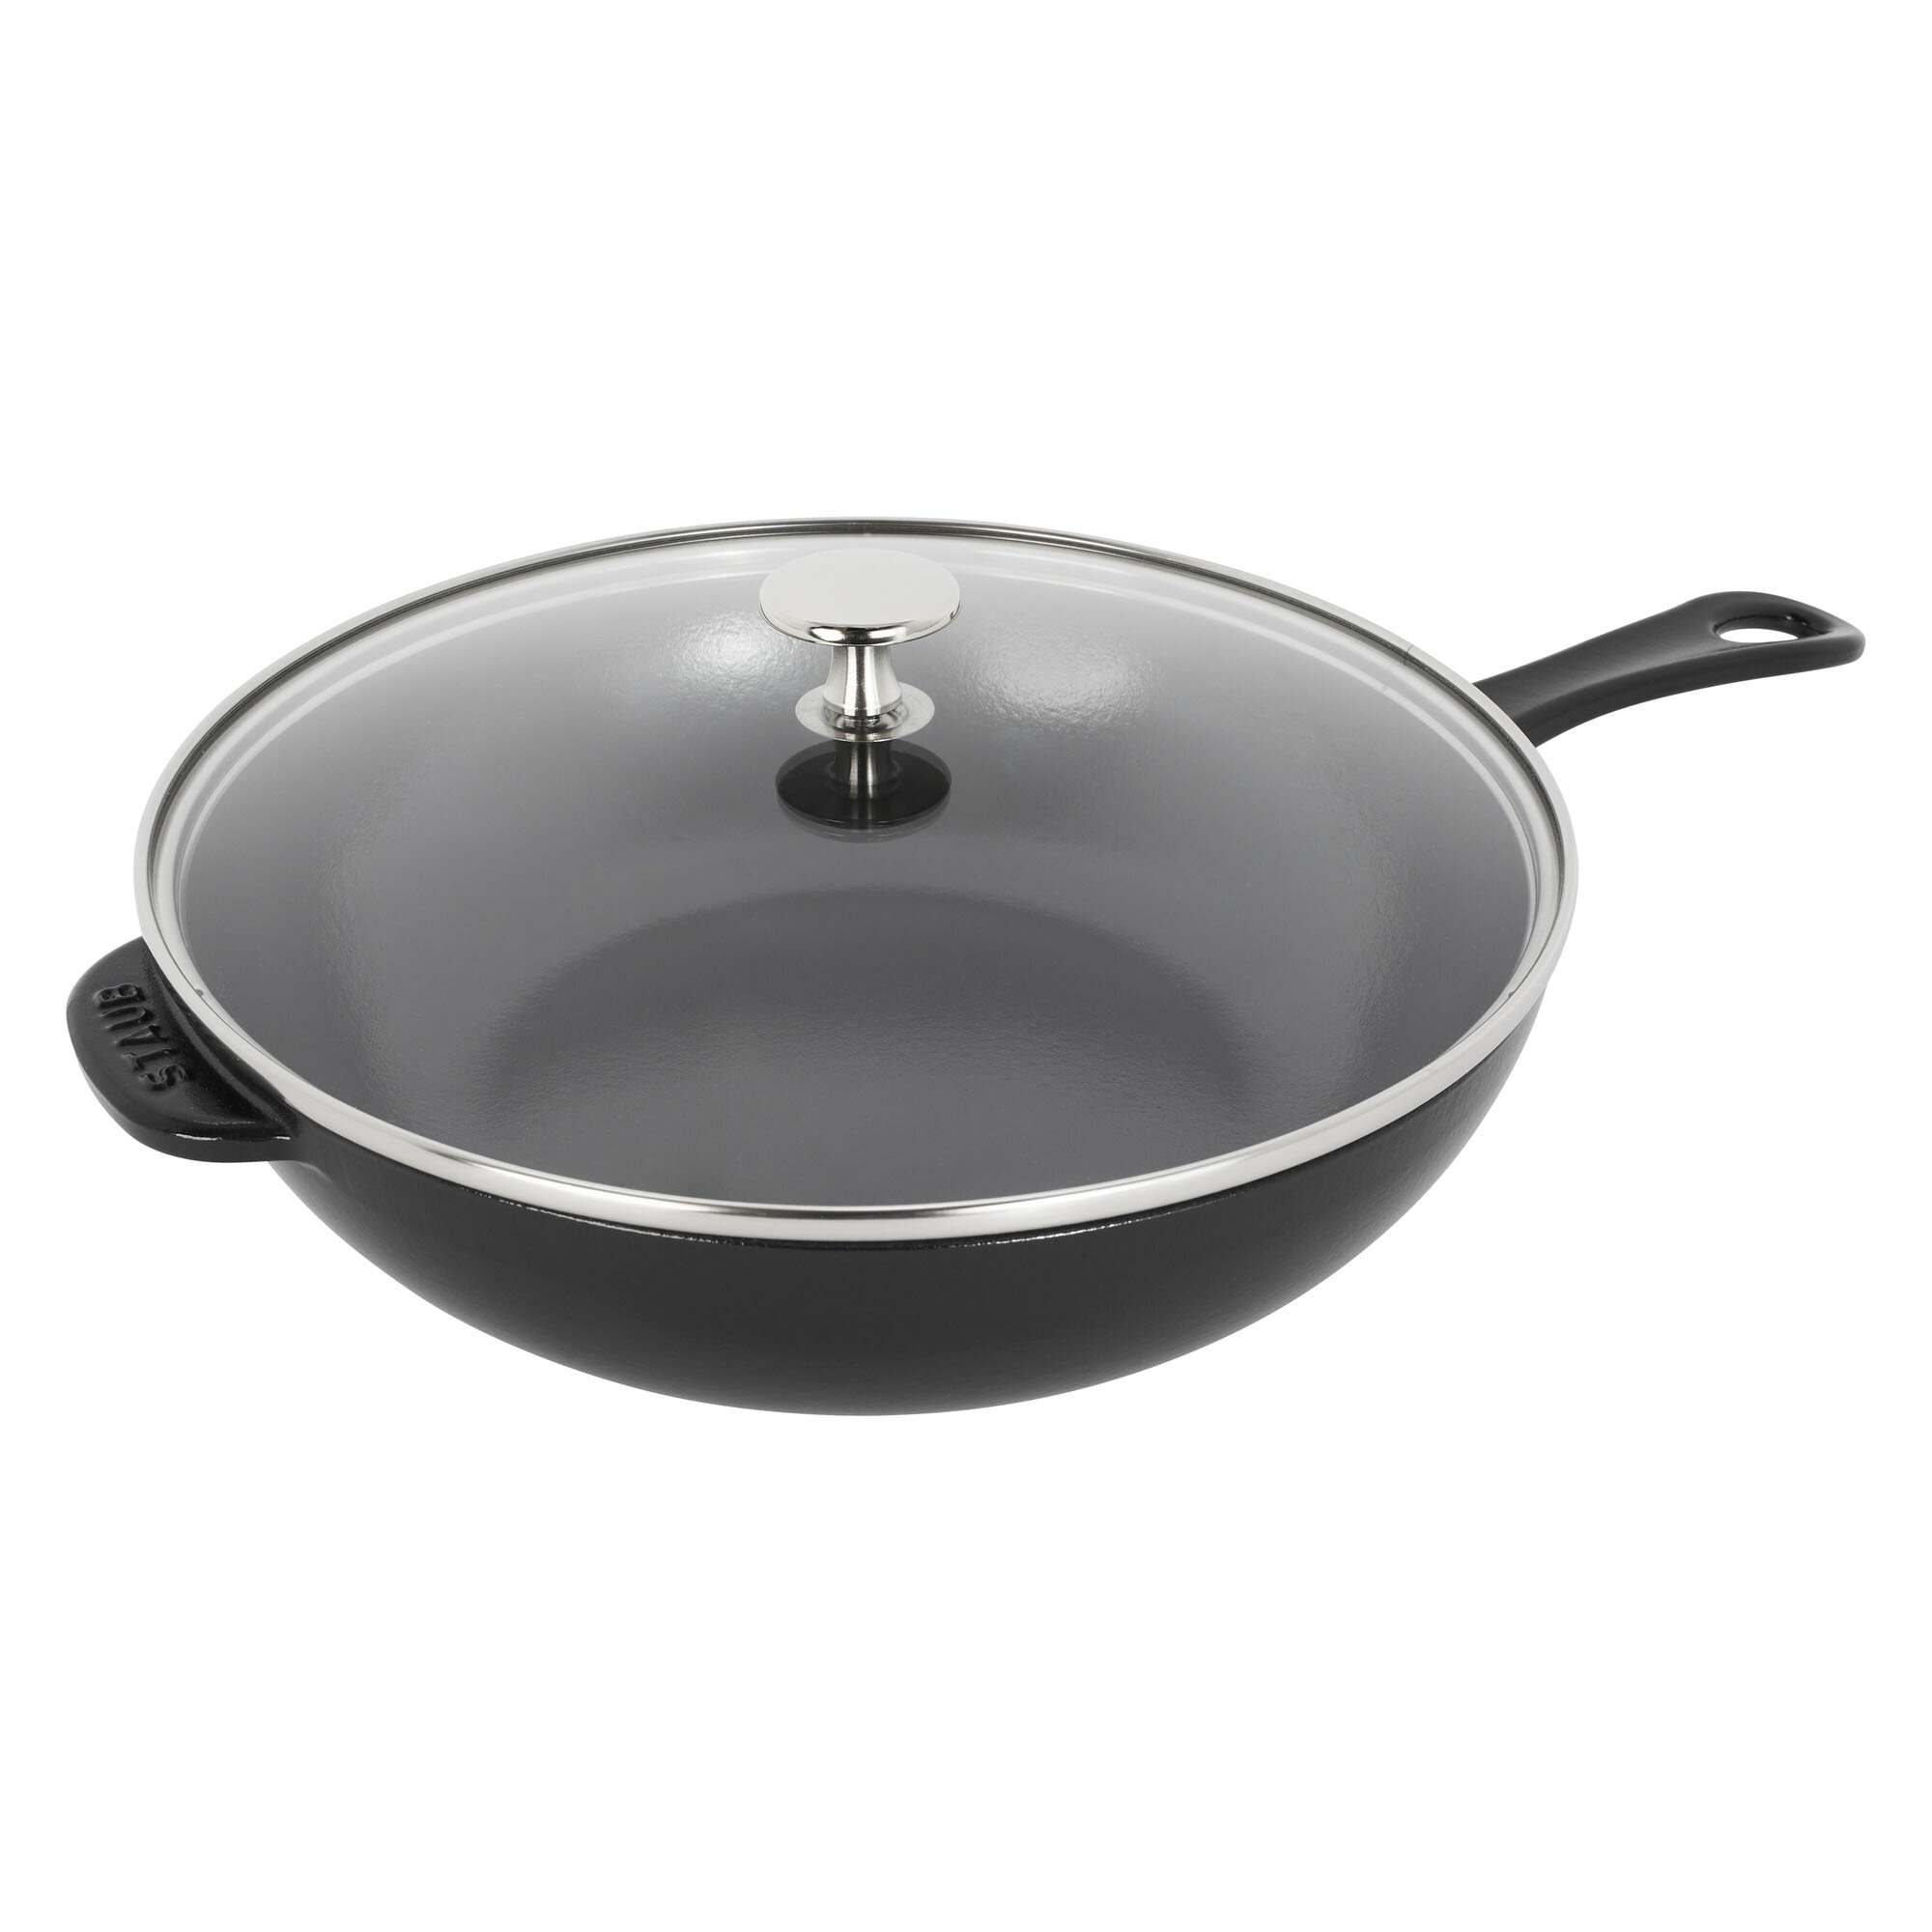 Staub Enameled Cast Iron Daily Pan with Glass Lid in Graphite Grey